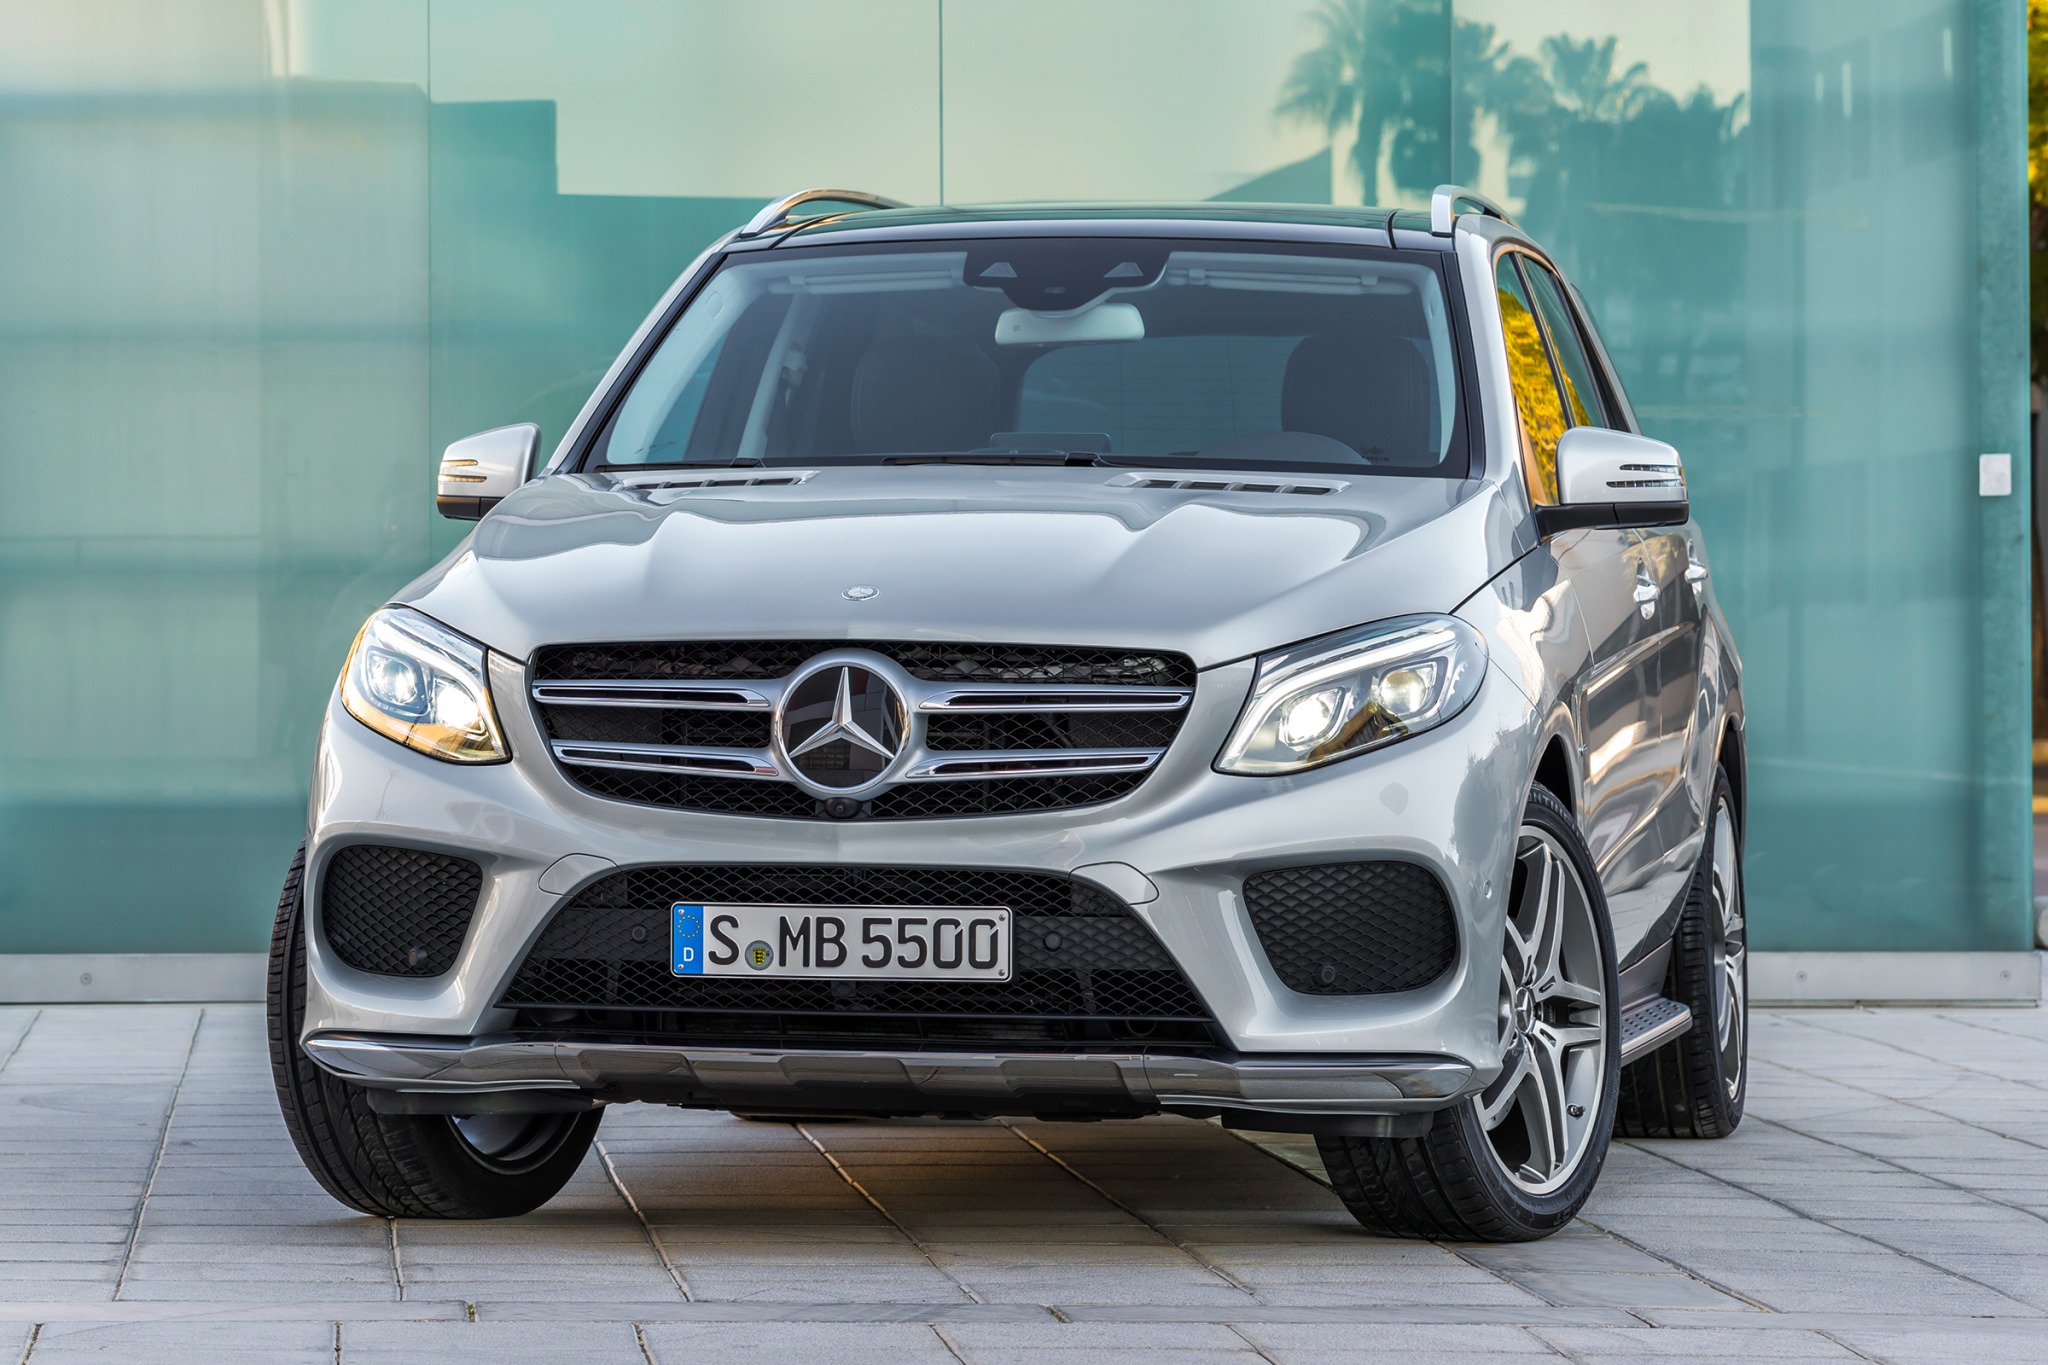 2017 Mercedes-Benz GLE-Class VIN Number Search - AutoDetective